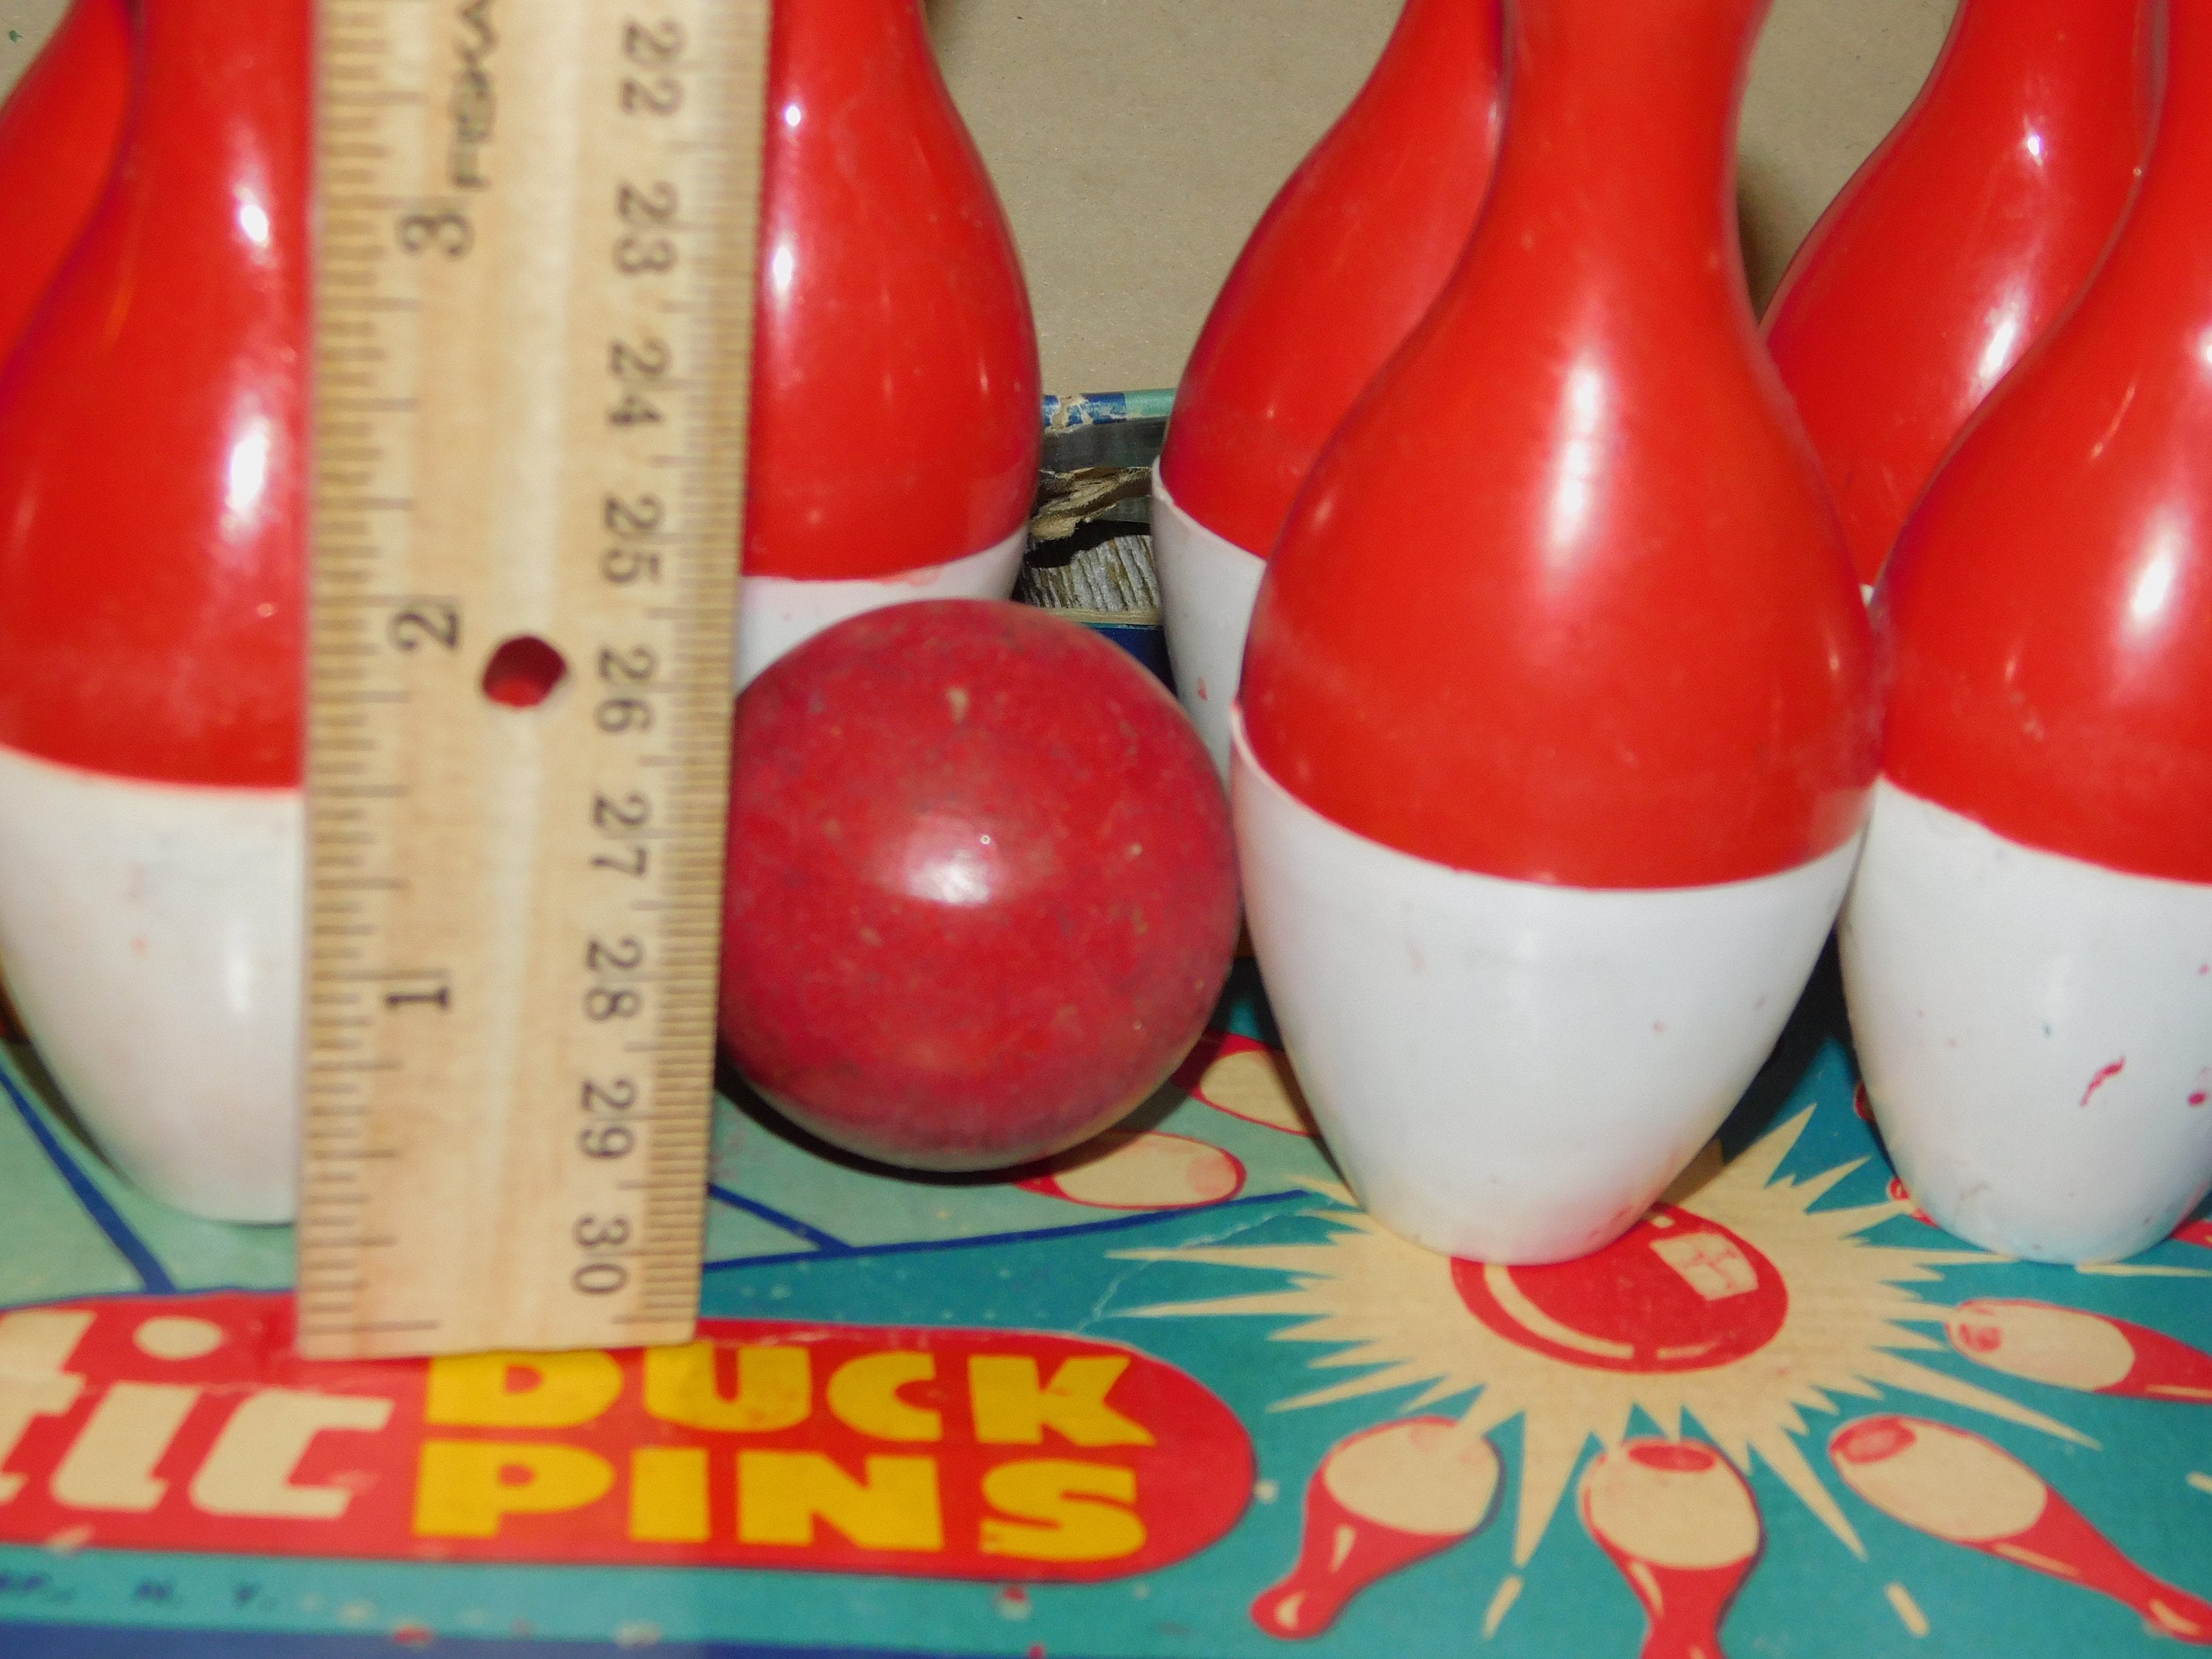 Vtg Deluxe Bowling Kit, With Plastic Duck Pins, Deluxe Game Corp